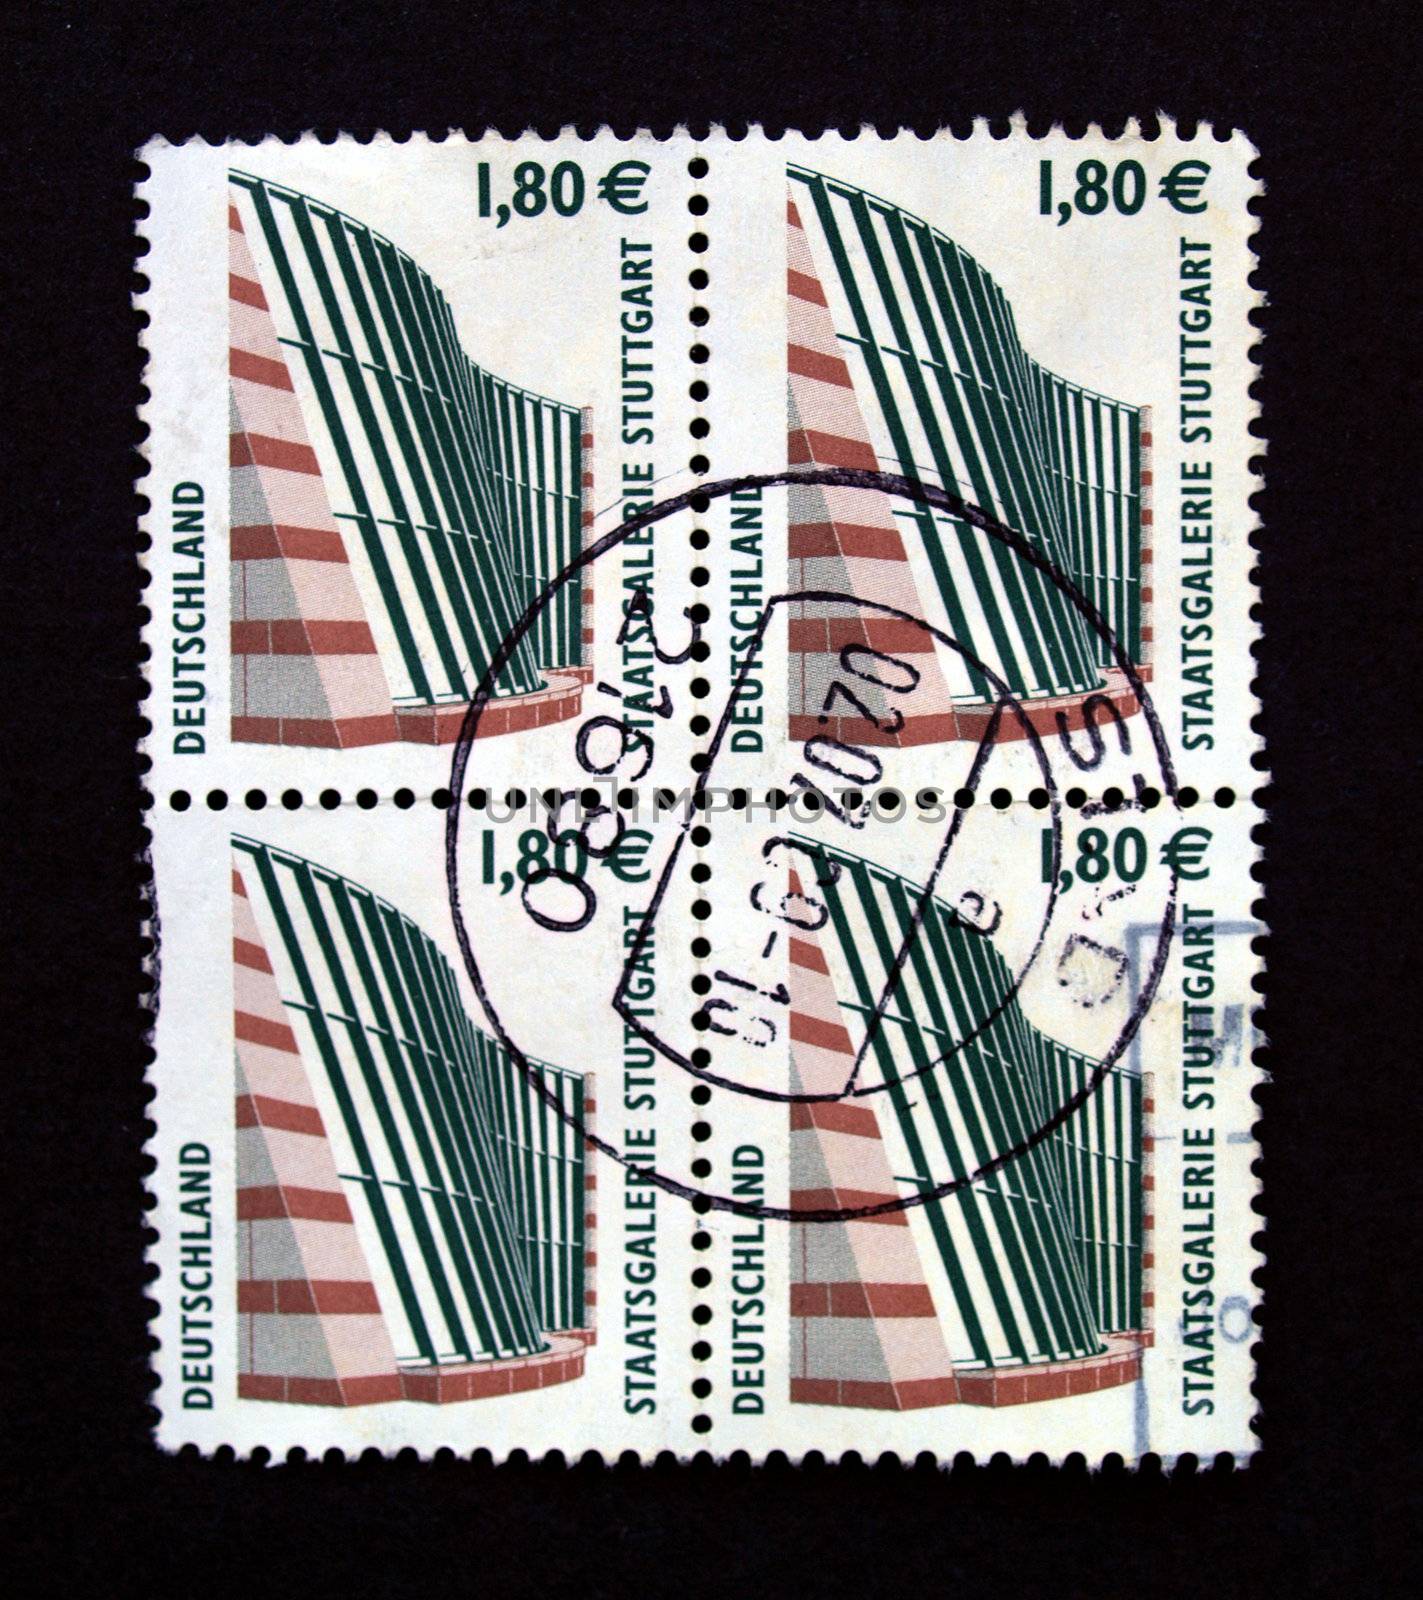 German postage stamp from Germany (European Union)